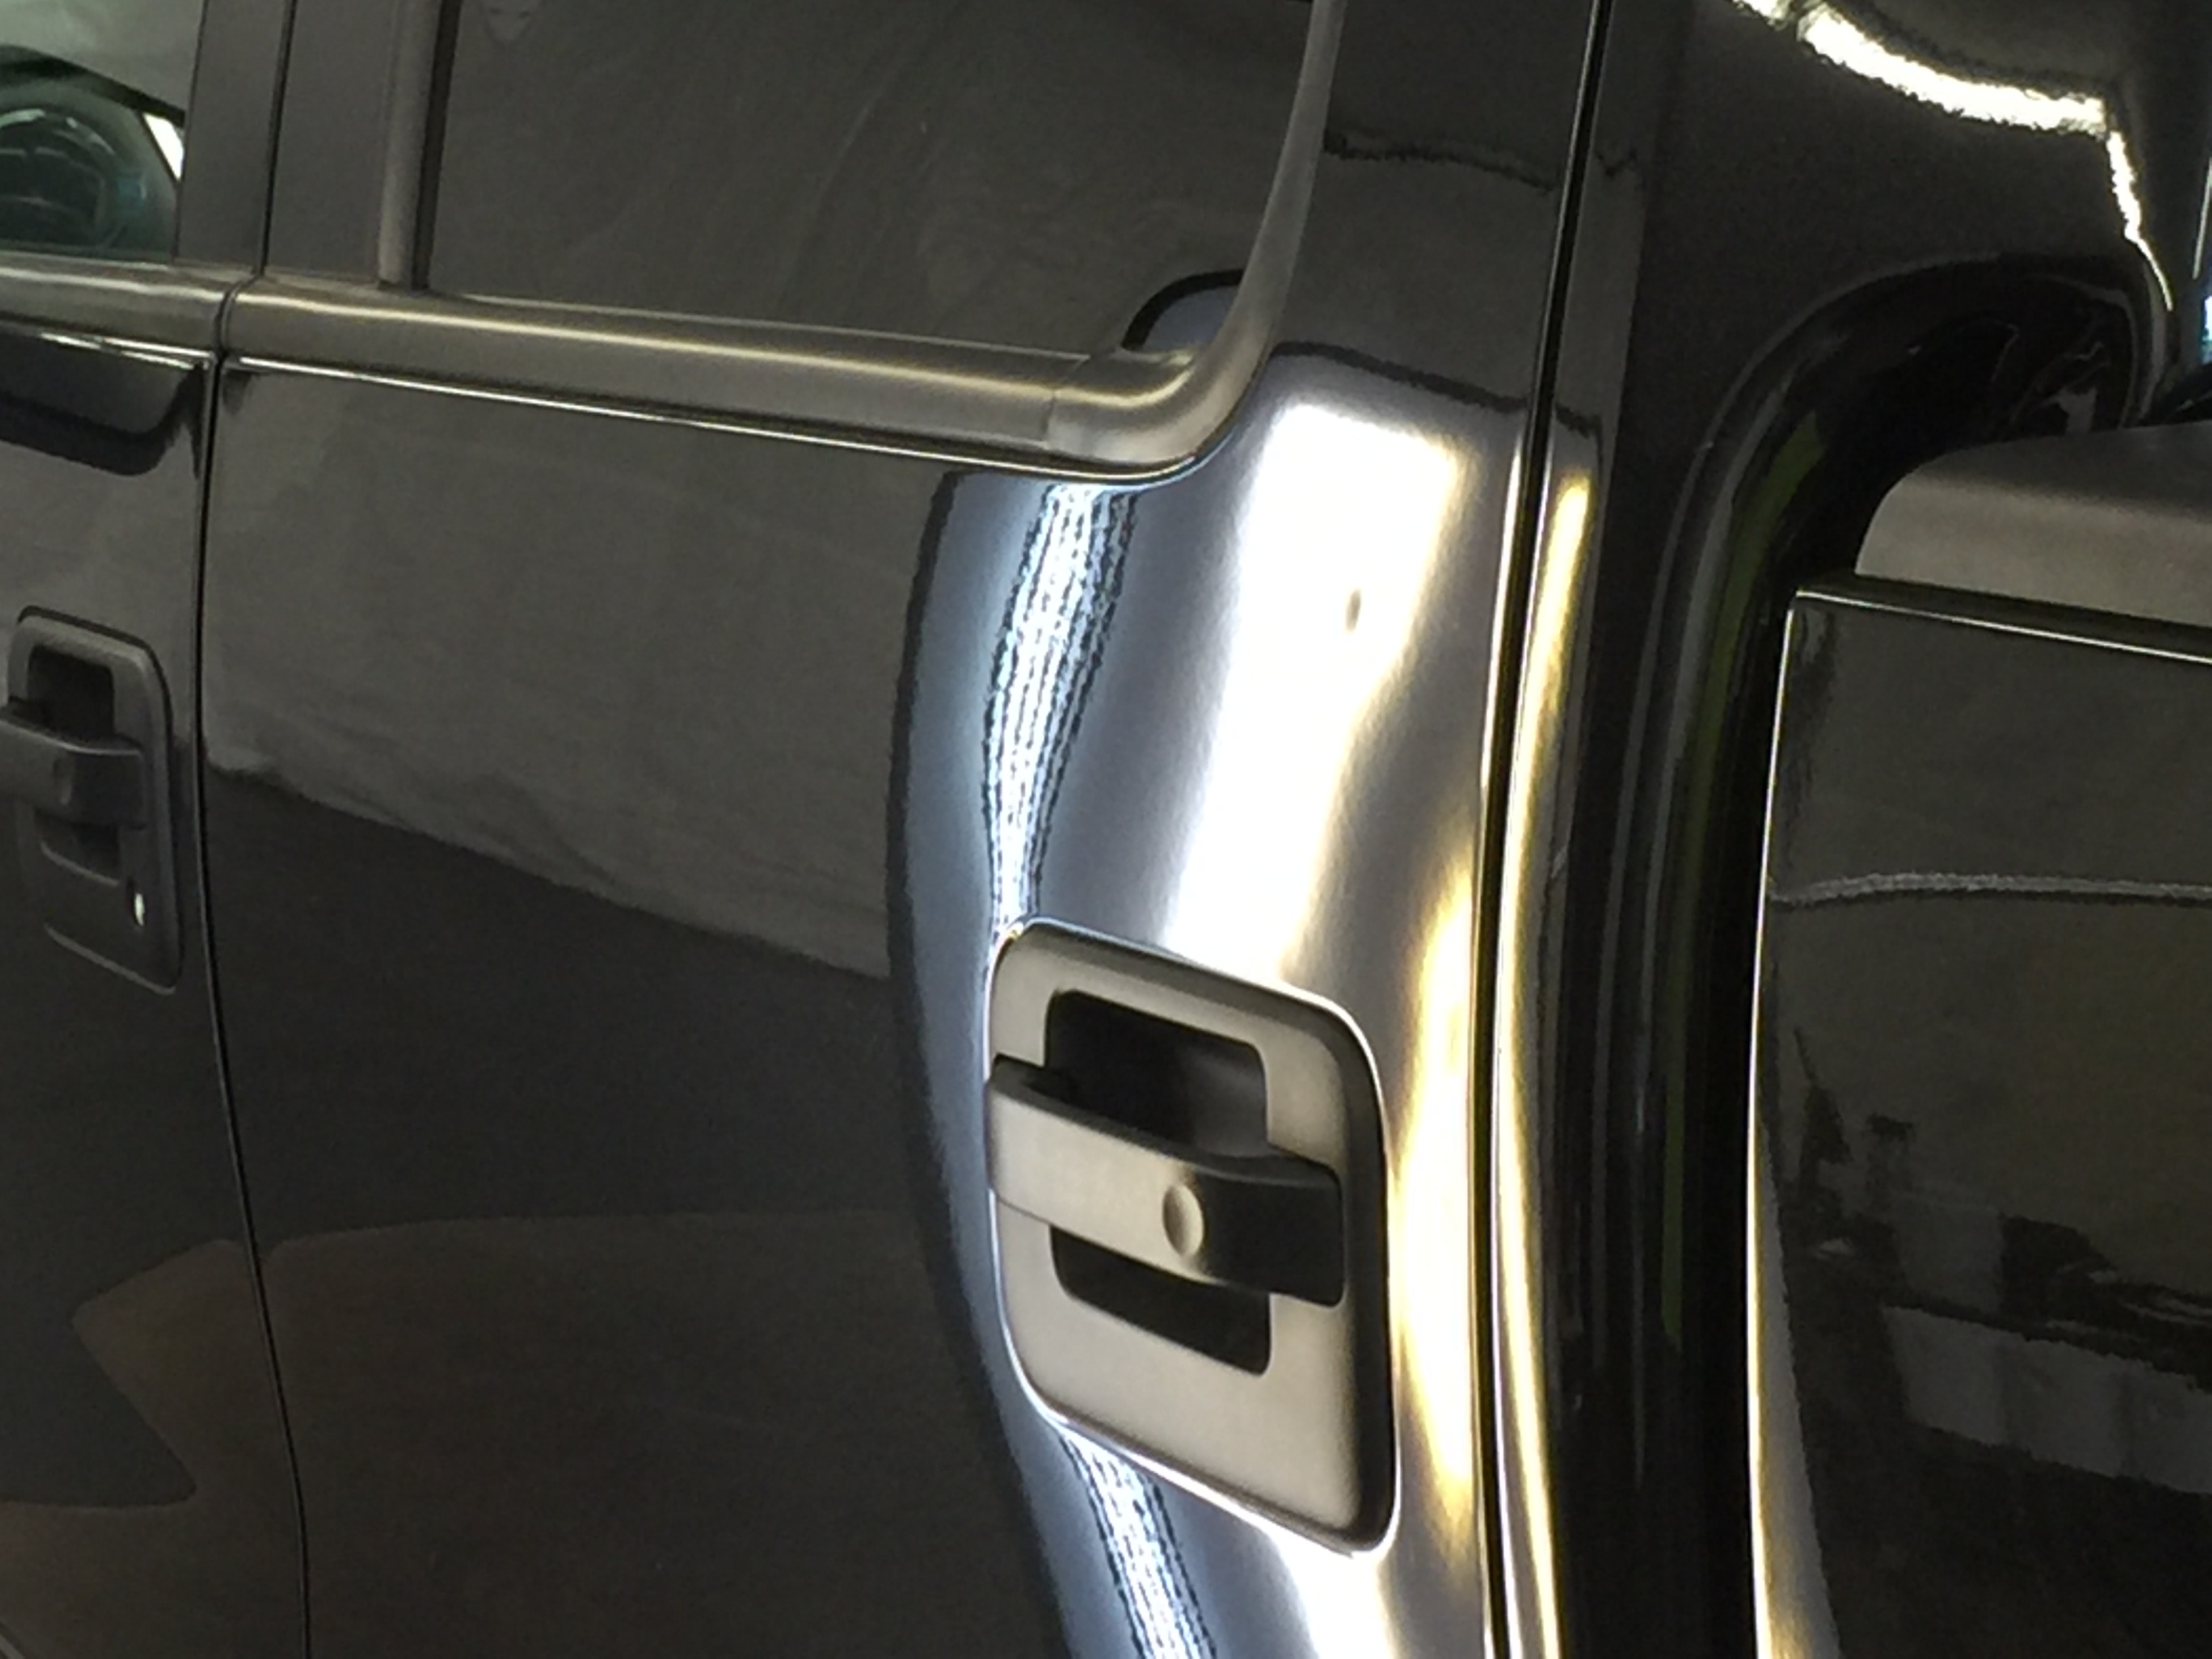 https://217dent.com 2014 Ford F-150 Dent Repair, Michael Bocek out of Springfield, IL. Drivers Side Rear Door, all glue pull dent removal. Paintless Dent Repair, Paintless Dent Removal, Taylorville, Decatur, Pana, IL